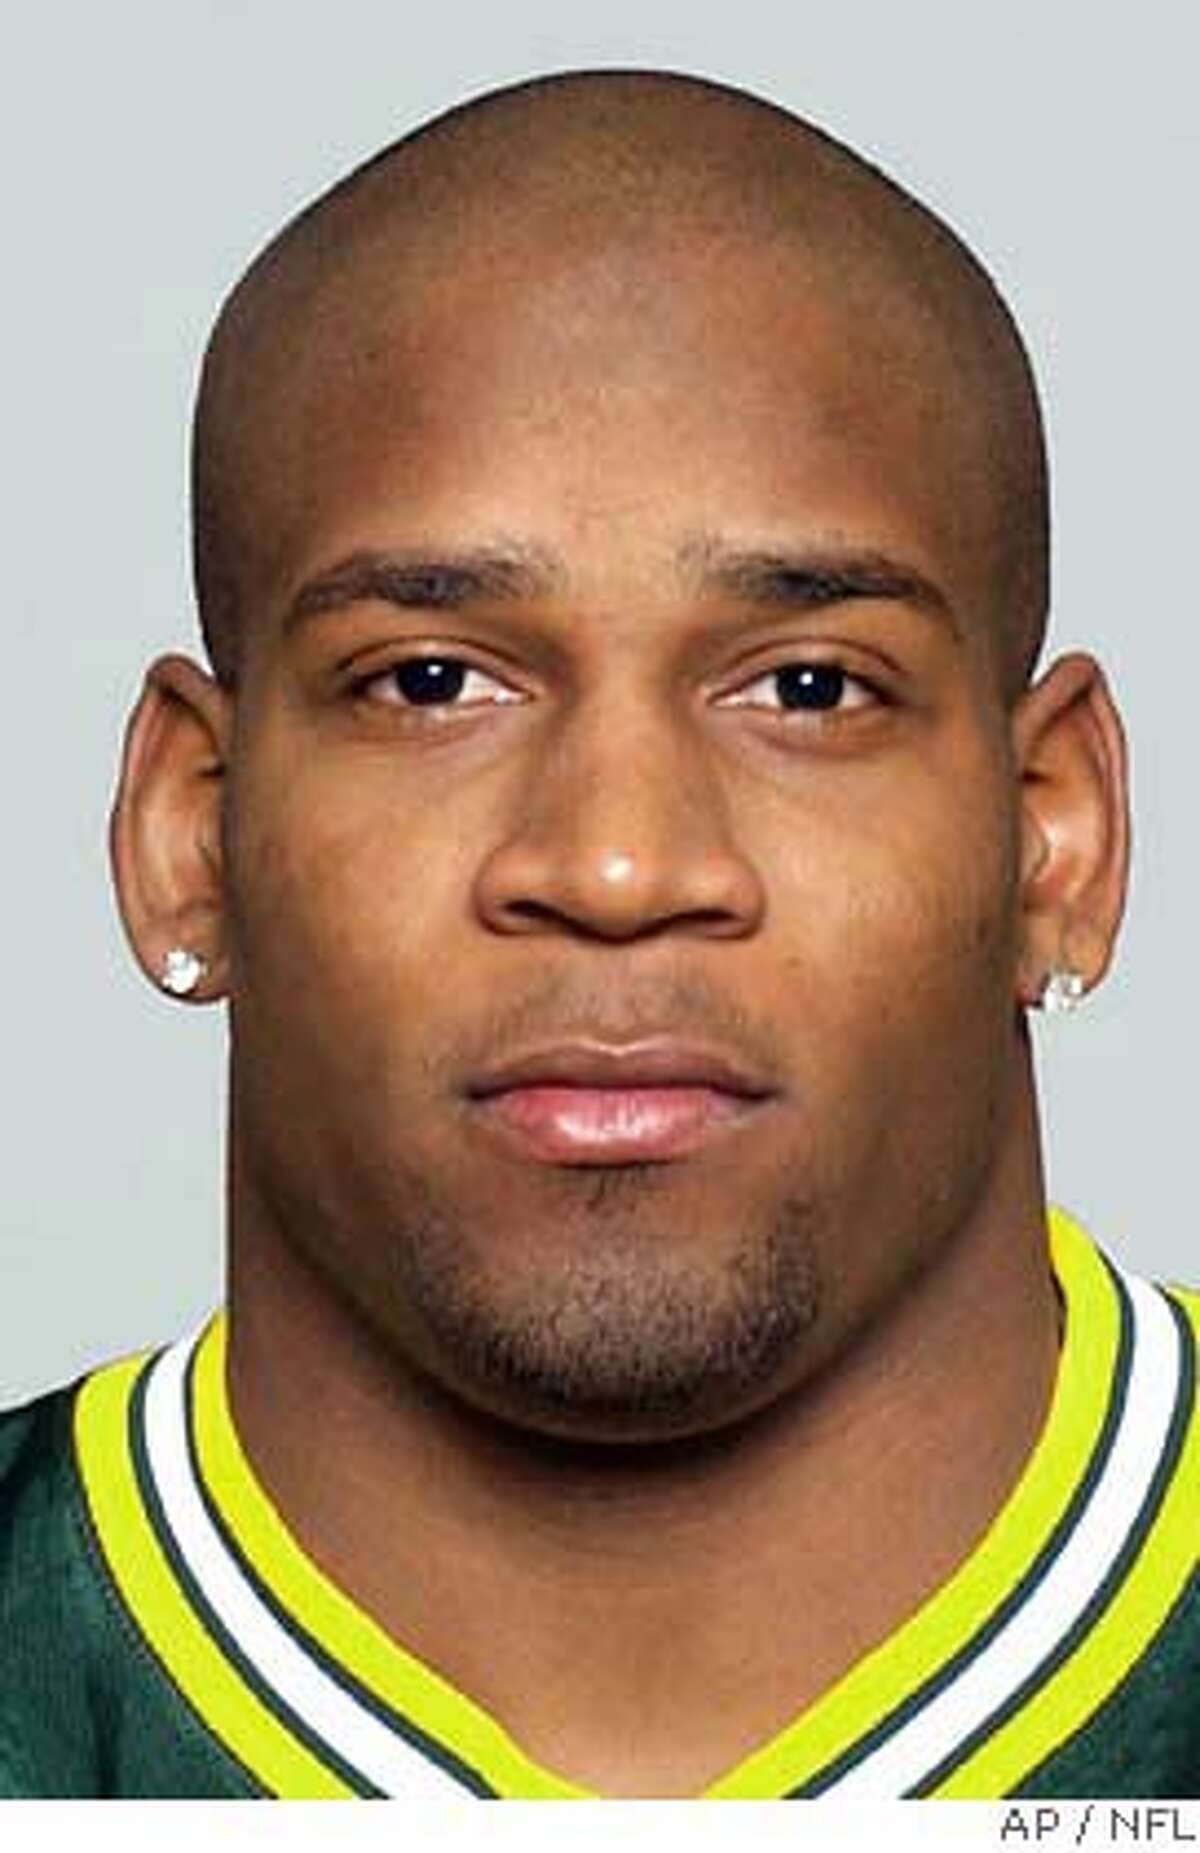 Oakland Raiders safety Marques Anderson and cornerback Charles Woodson are shown in these 2004 hand photos provided by the NFL. Anderson and Woodson were arrested early Monday, Dec. 20, 2004 in Oakland for investigation of public intoxication following the Raiders' victory over the Tennessee Titans on Sunday. (AP Photo/NFL, HO)